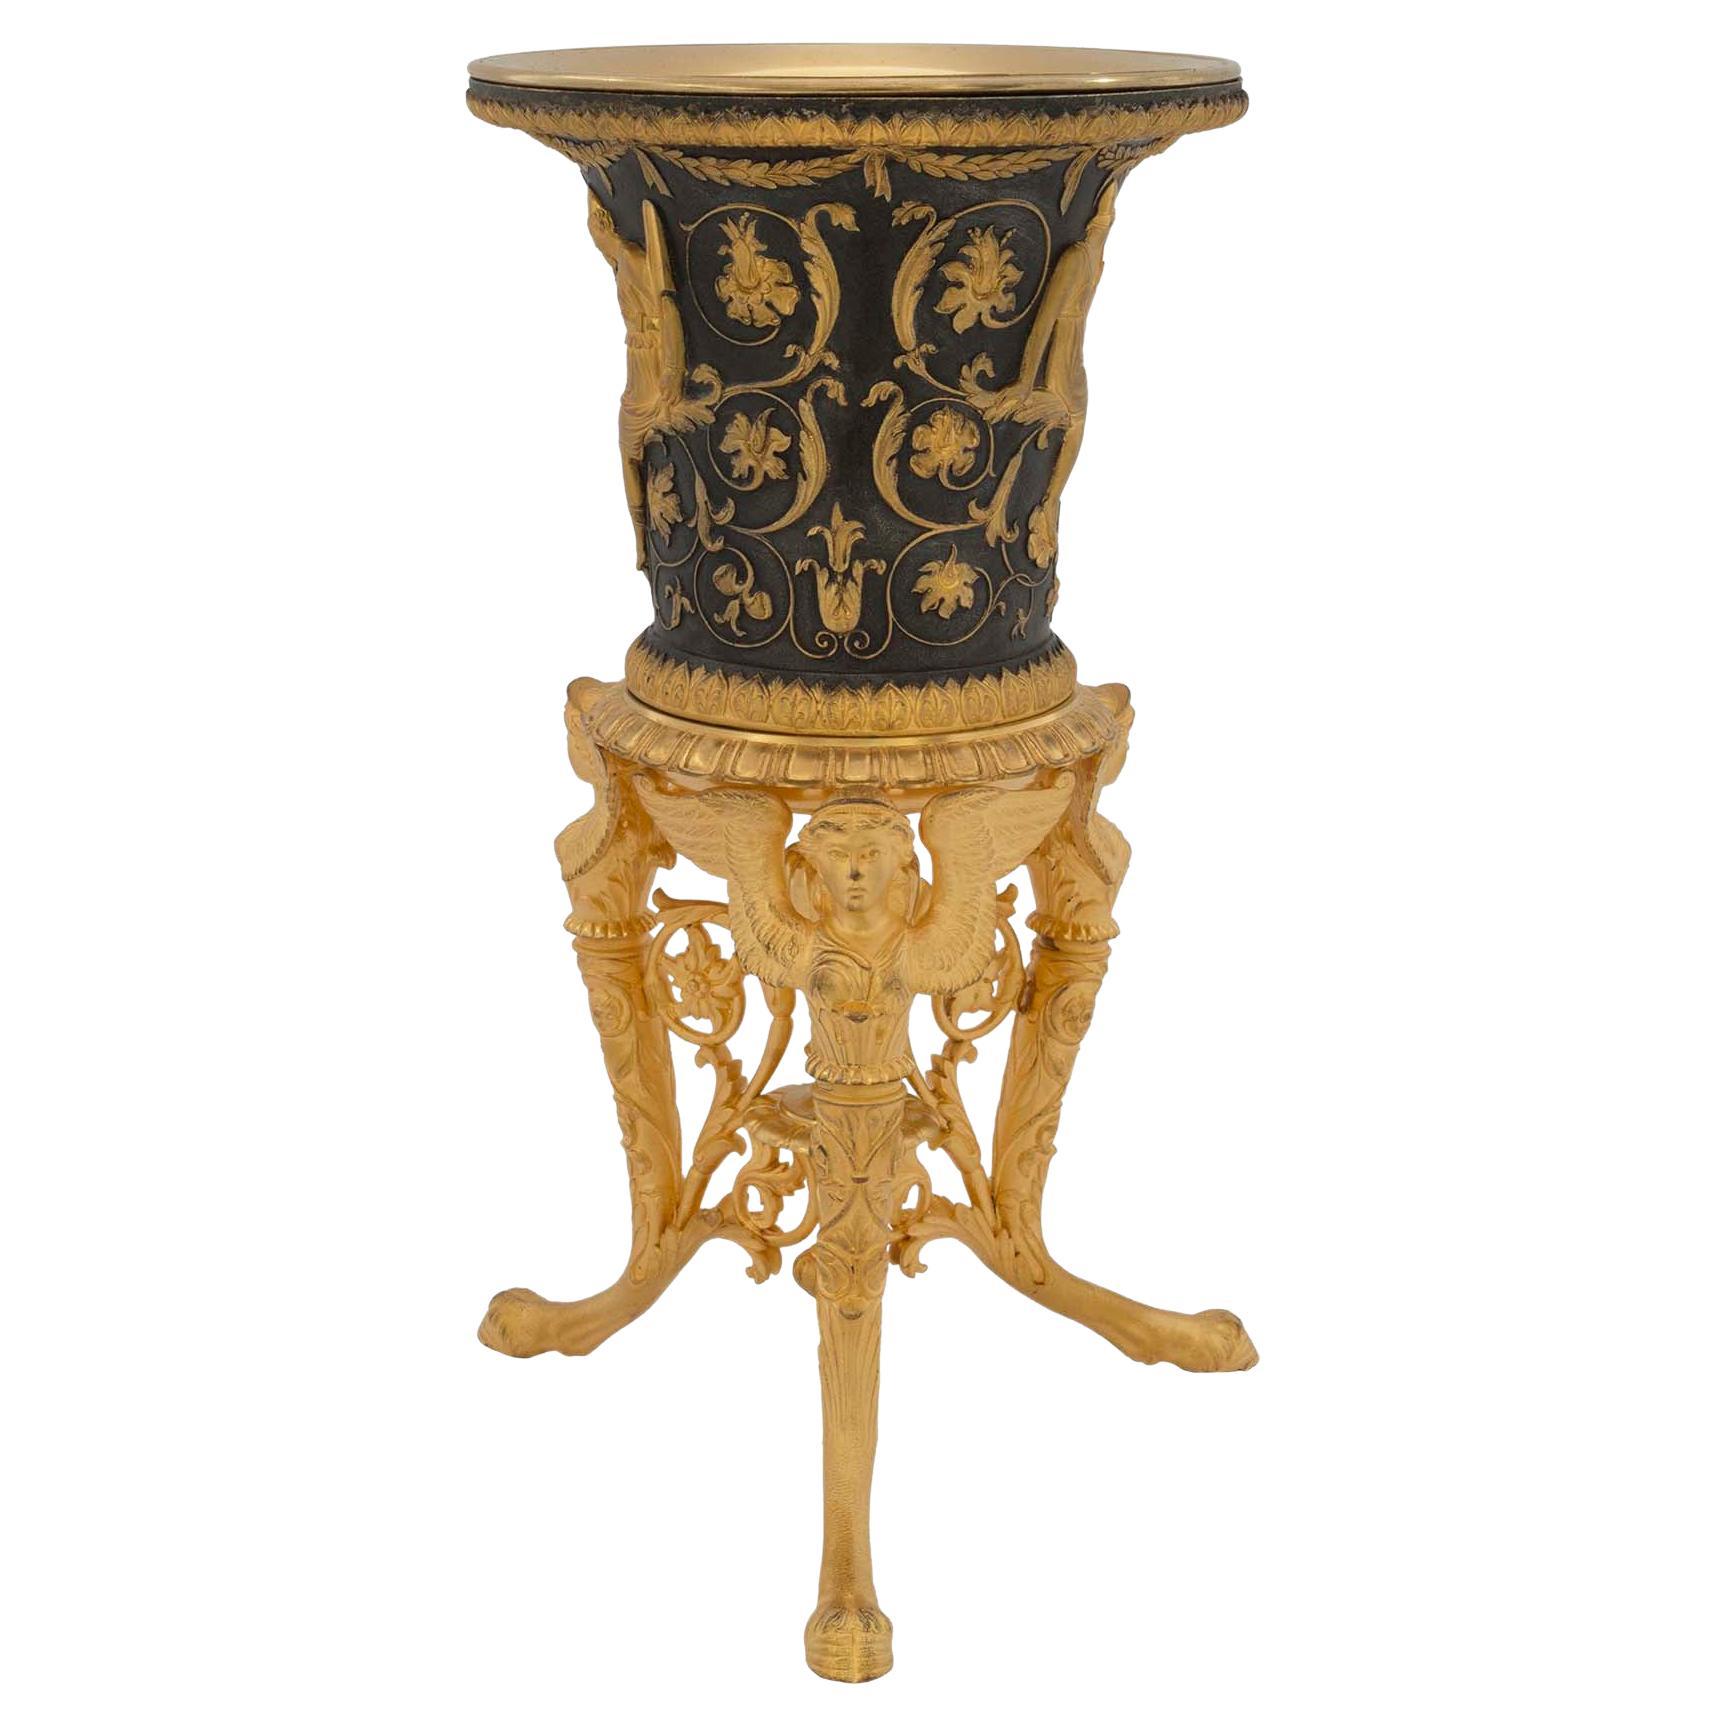 French 19th Century Neoclassical Style Bronze and Ormolu Urn For Sale